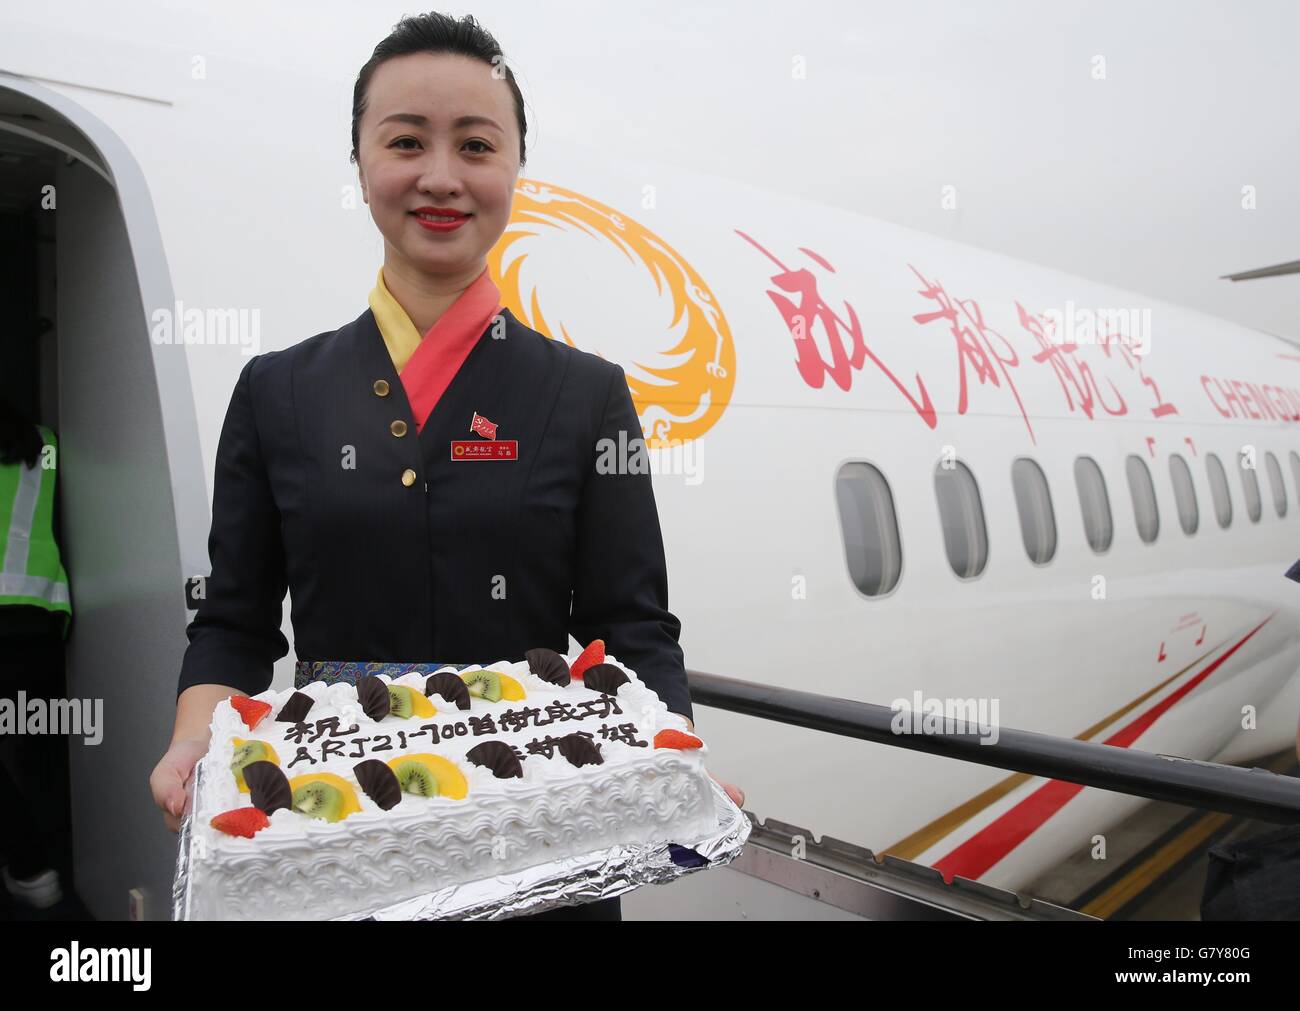 Shanghai, China. 28th June, 2016. A stewardess shows a cake to celebrate the first commercial flight of Chengdu Airlines ARJ21-700 at Hongqiao International Airport in Shanghai, east China, June 28, 2016. ARJ21, manufactured by the Commercial Aircraft Corp. of China (COMAC), made its maiden commercial flight from Chengdu, captial of southwest China's Sichuan Province, to Shanghai on Tuesday. The domestically-designed airliner is China's first regional jet manufactured according to international standards. © Pei Xin/Xinhua/Alamy Live News Stock Photo